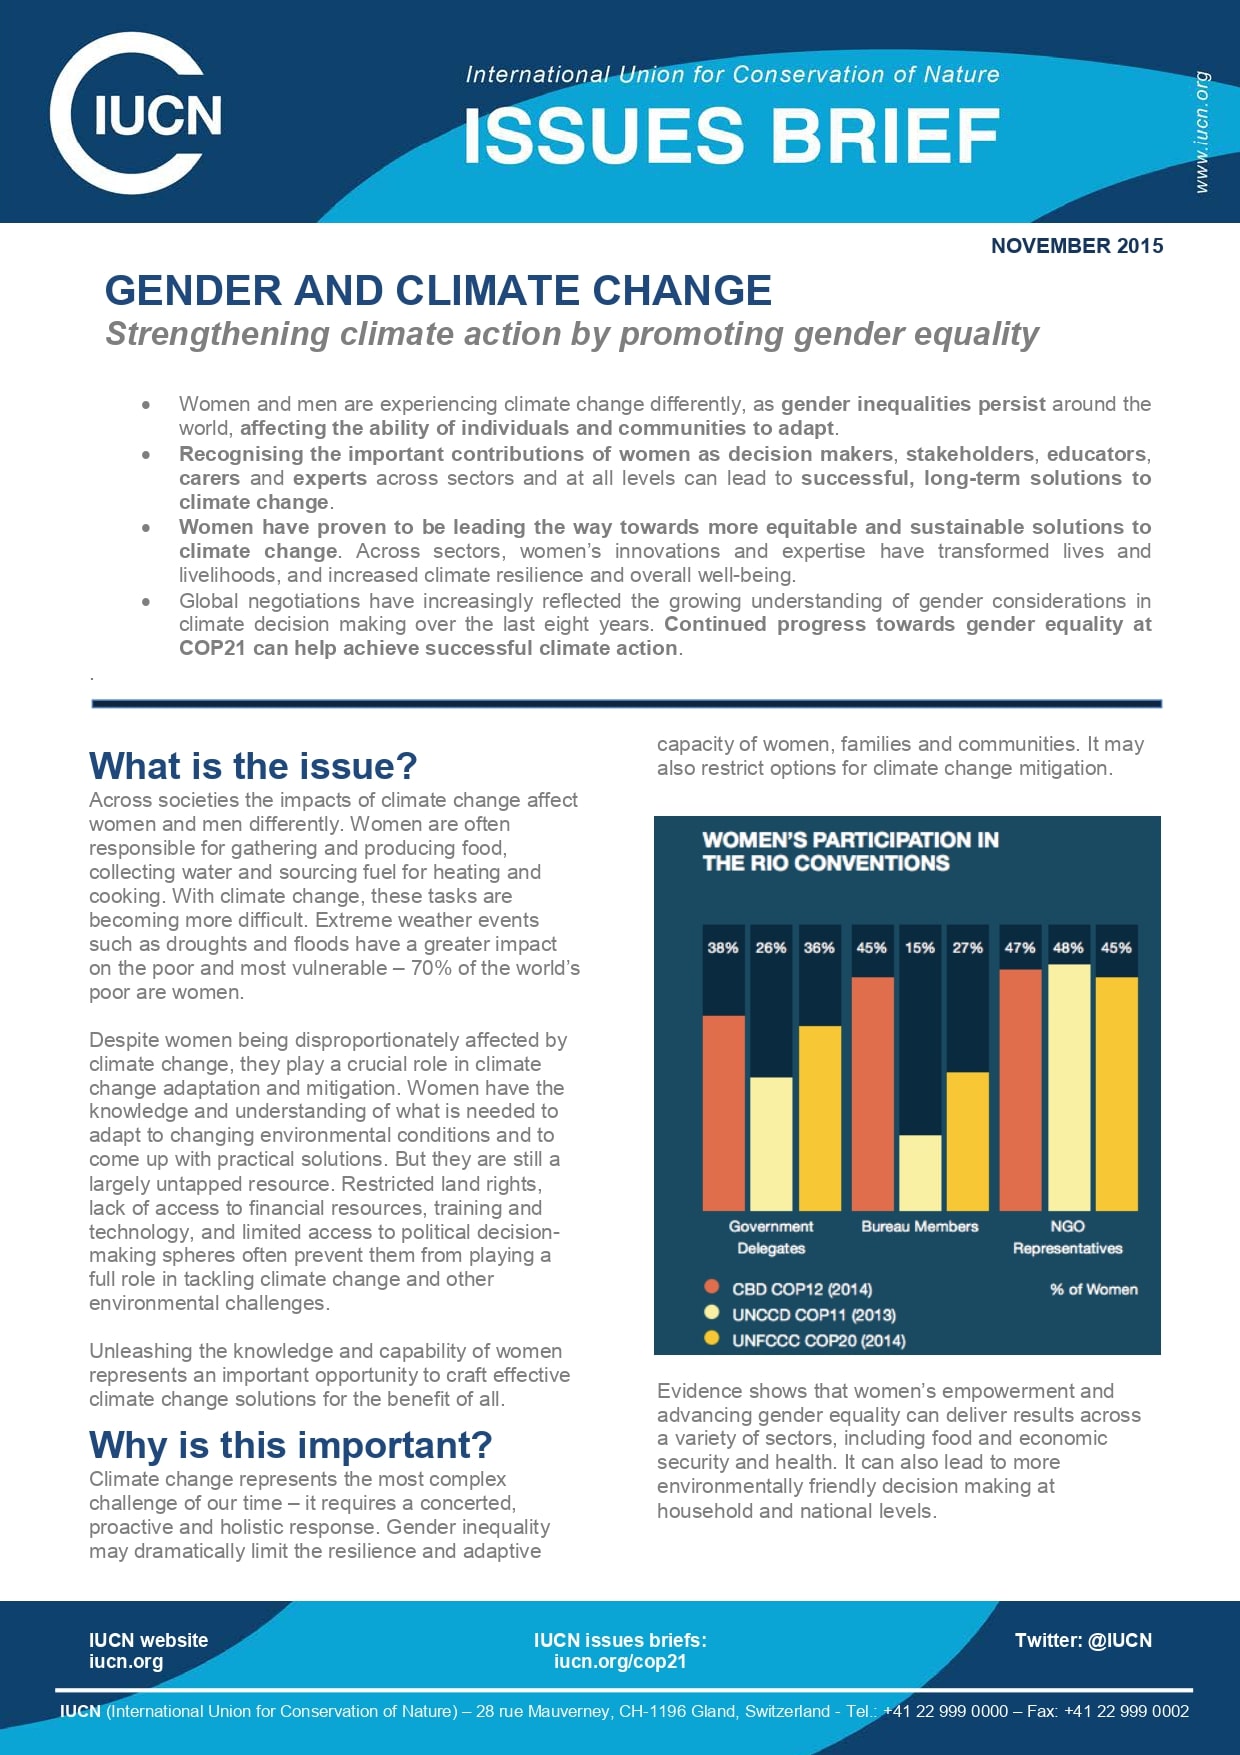 Gender and climate change